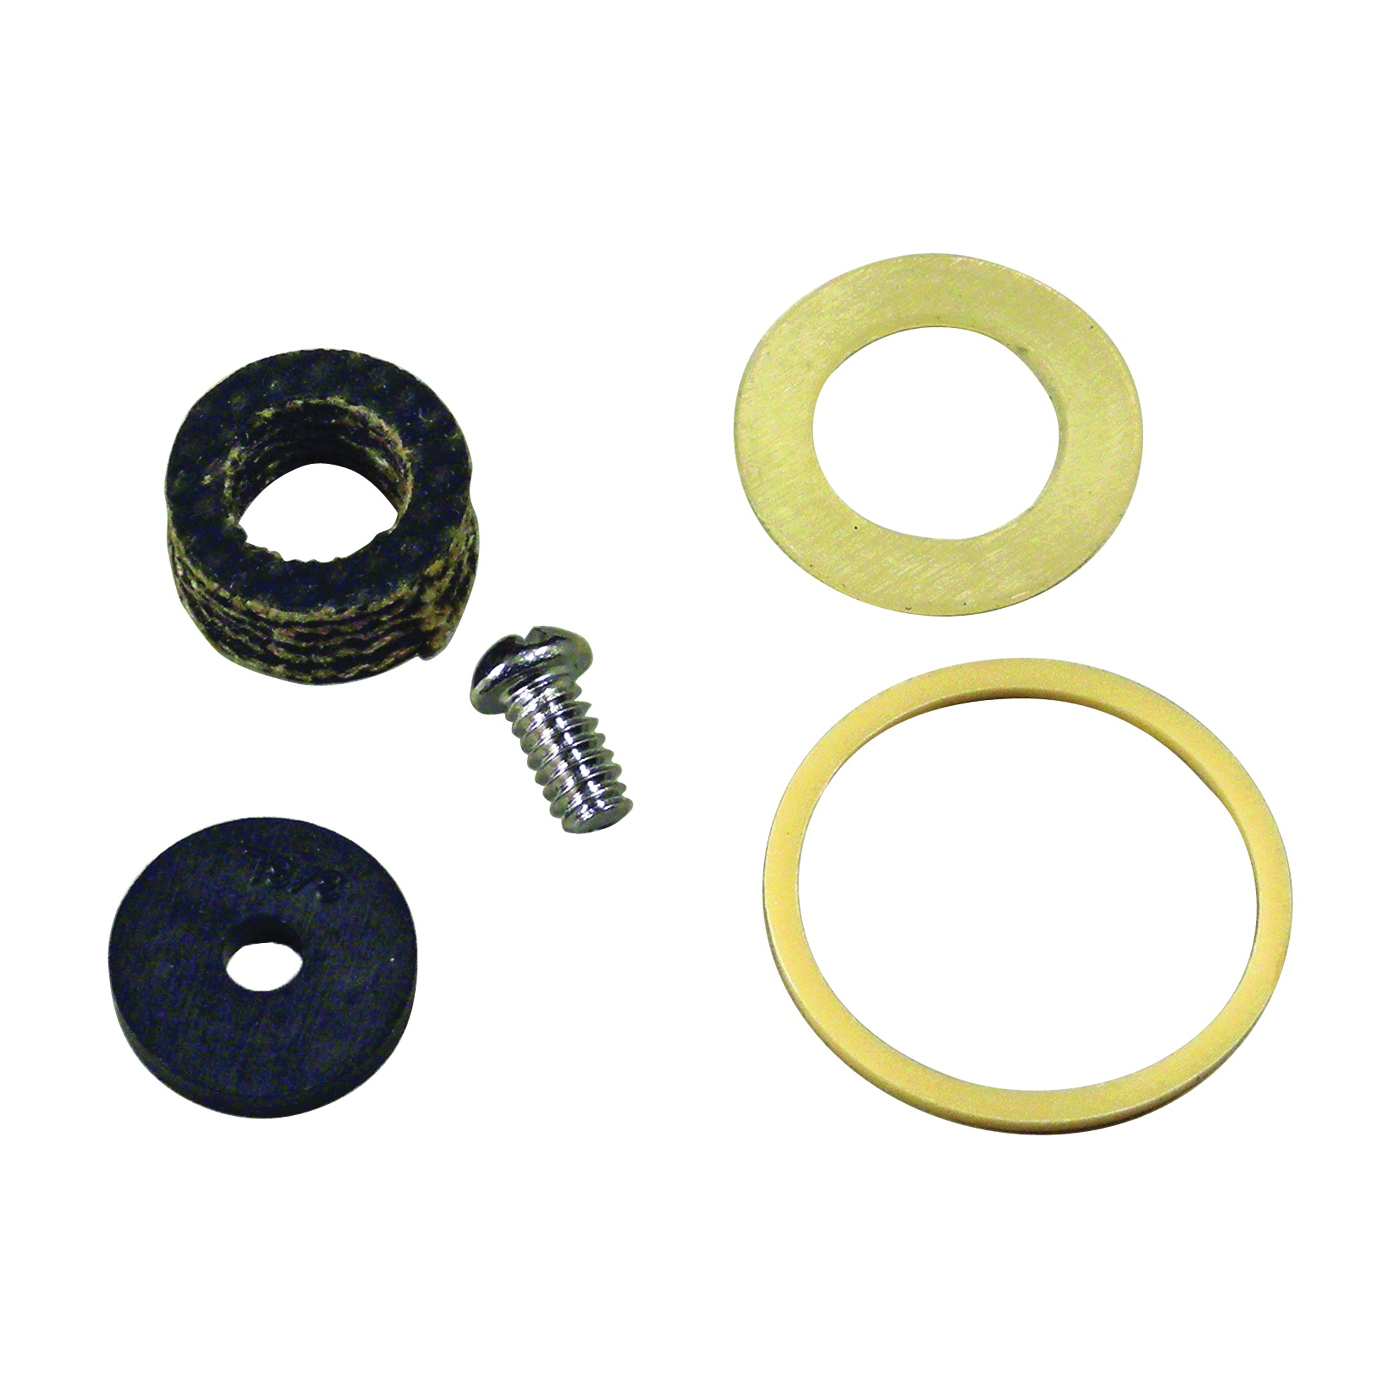 80291 Repair Kit, Stainless Steel, For: Price Pfister Faucets